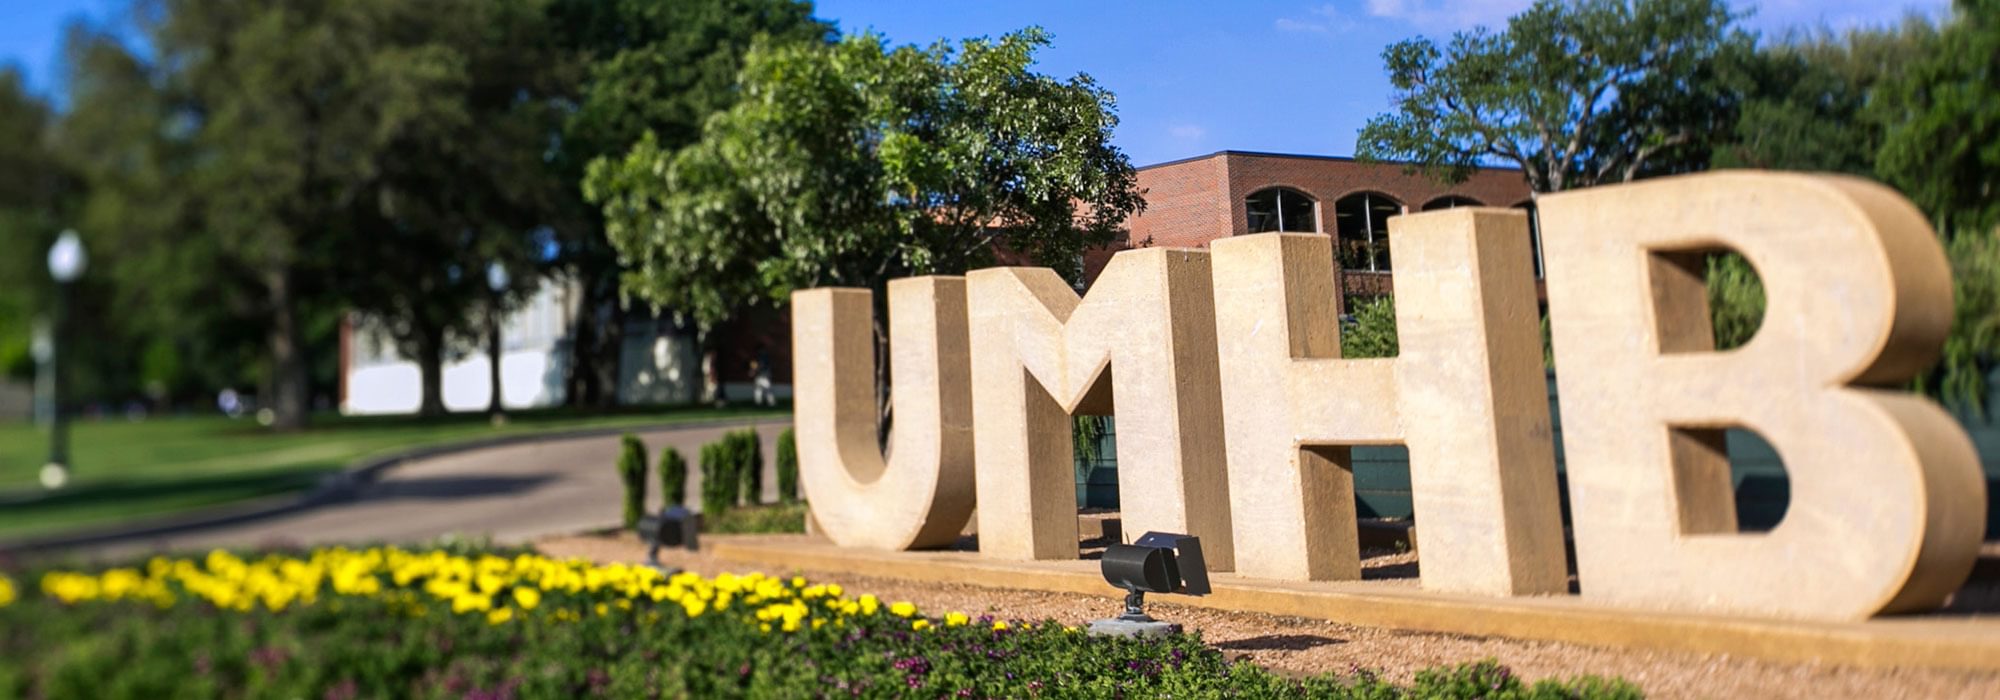 UMHB Presents 8th Annual Latino Fest with Special Hispanic Musical Performance Sept. 29